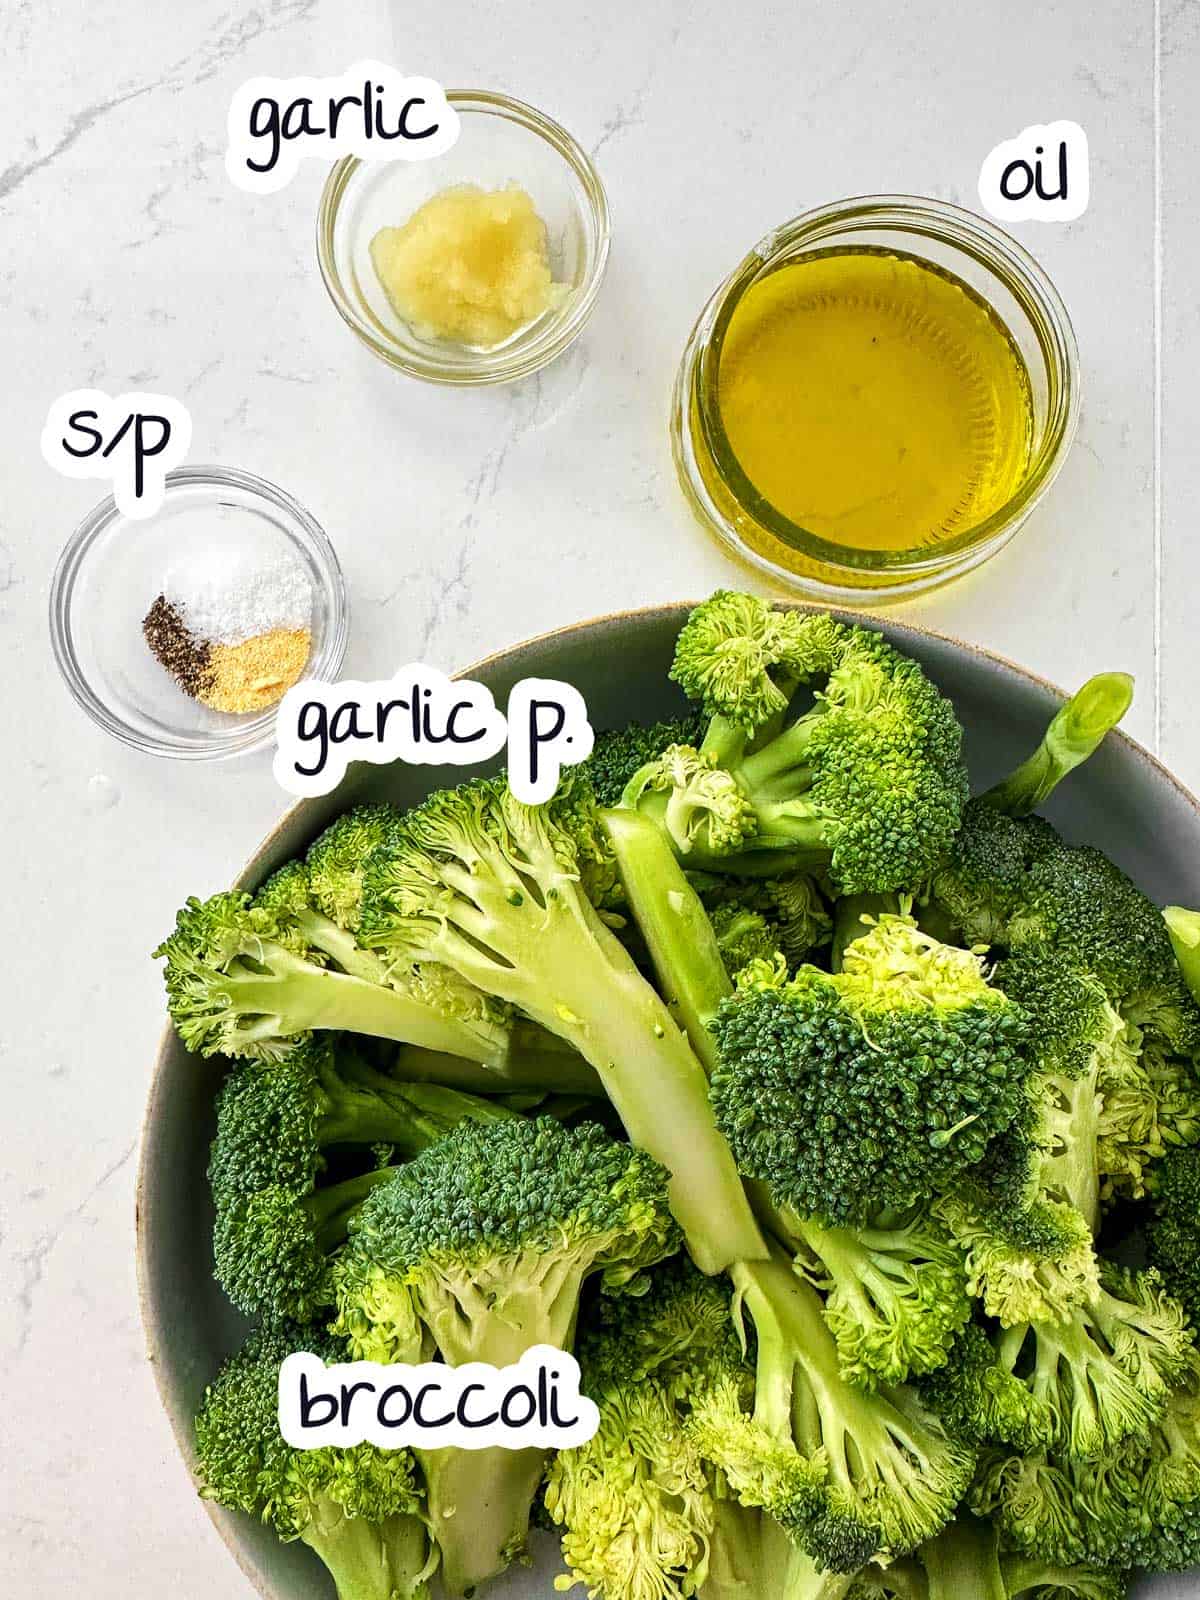 ingredients for garlic roasted broccoli with text labels